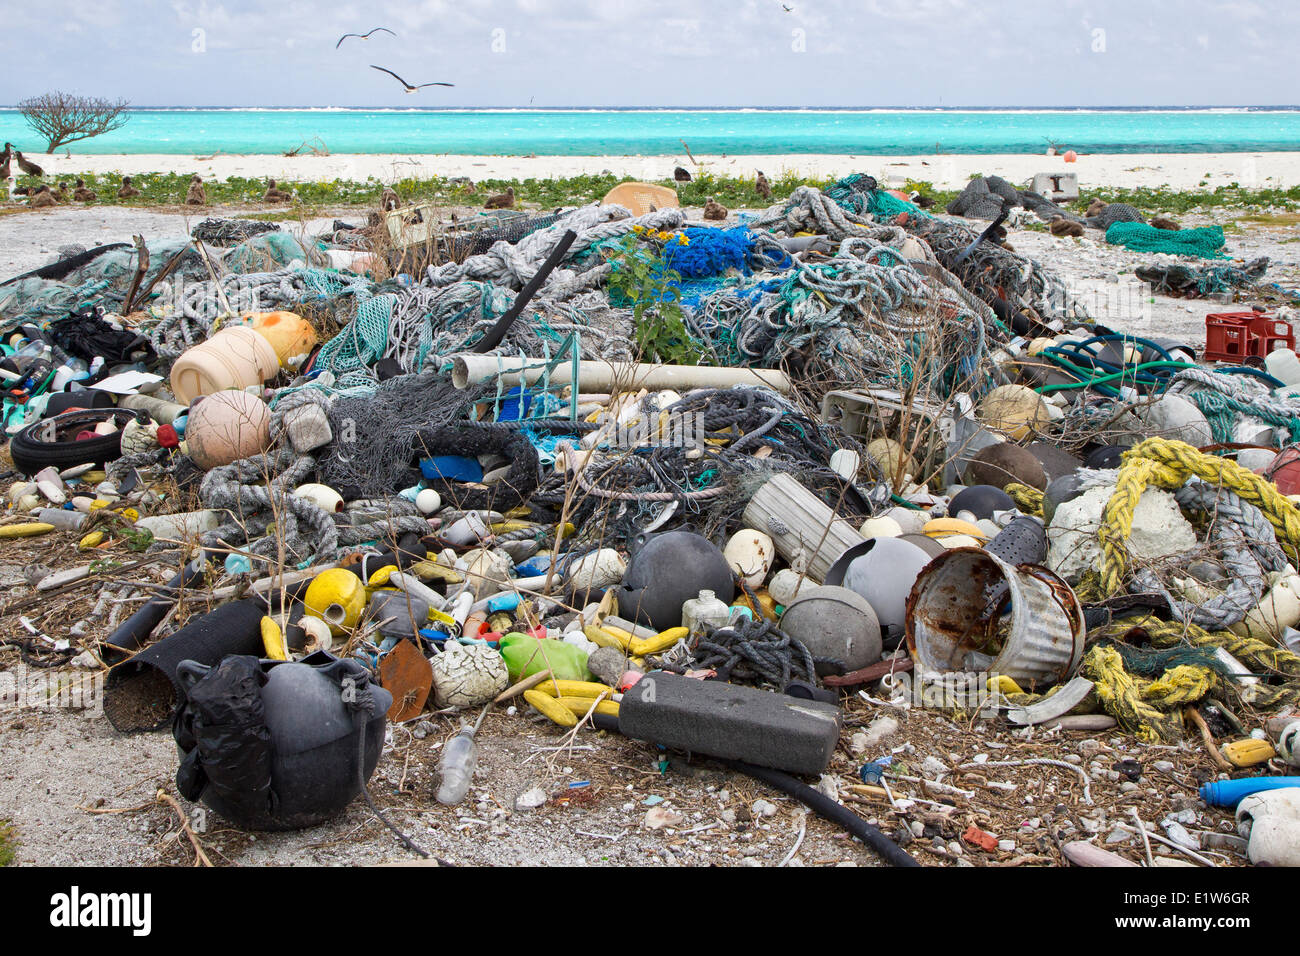 Plastic garbage collected research plot to assess plastic pollution Eastern Island Midway Atoll National Wildlife Refuge Stock Photo